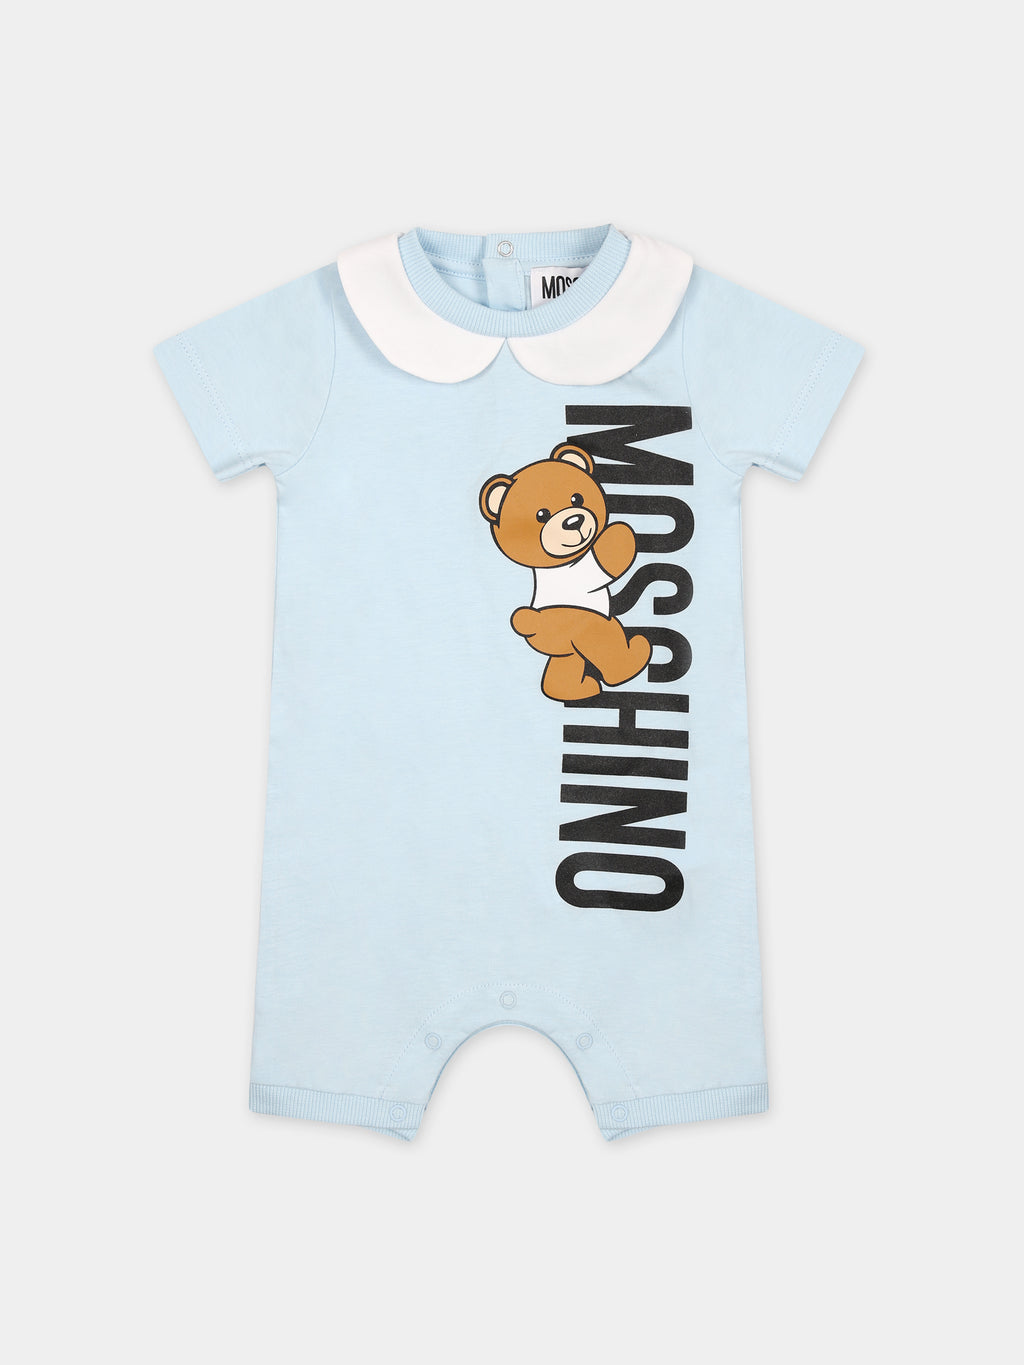 Light blue romper for baby boy with Teddy Bear and logo